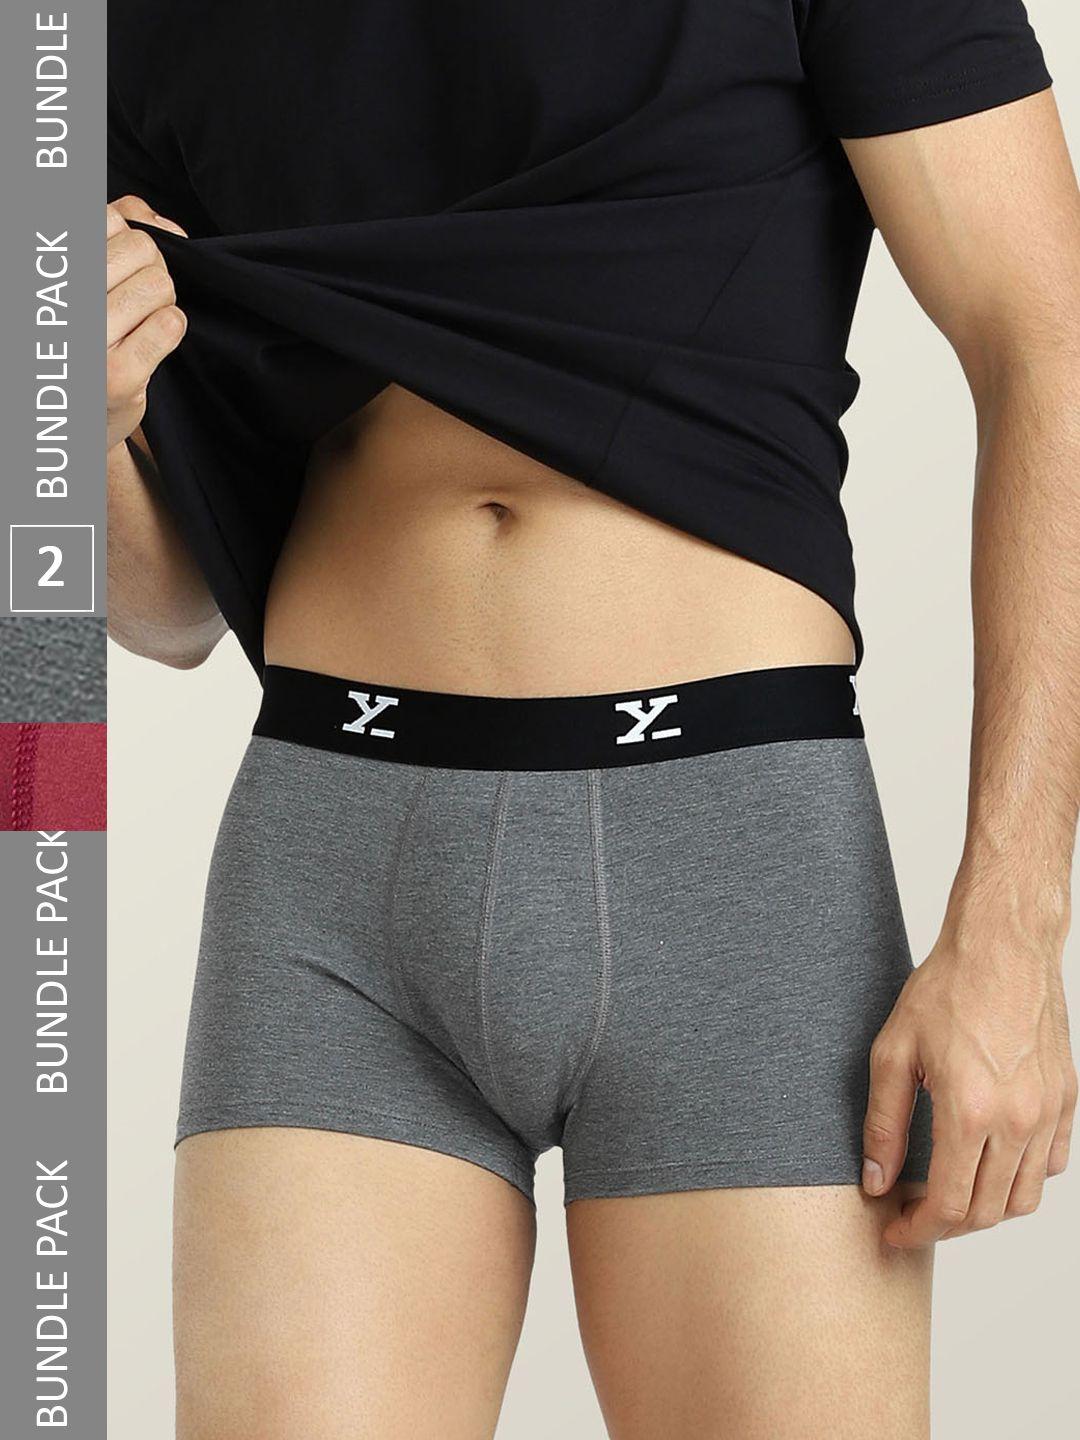 xyxx pack of 2 trunks xytrnk2pckn567